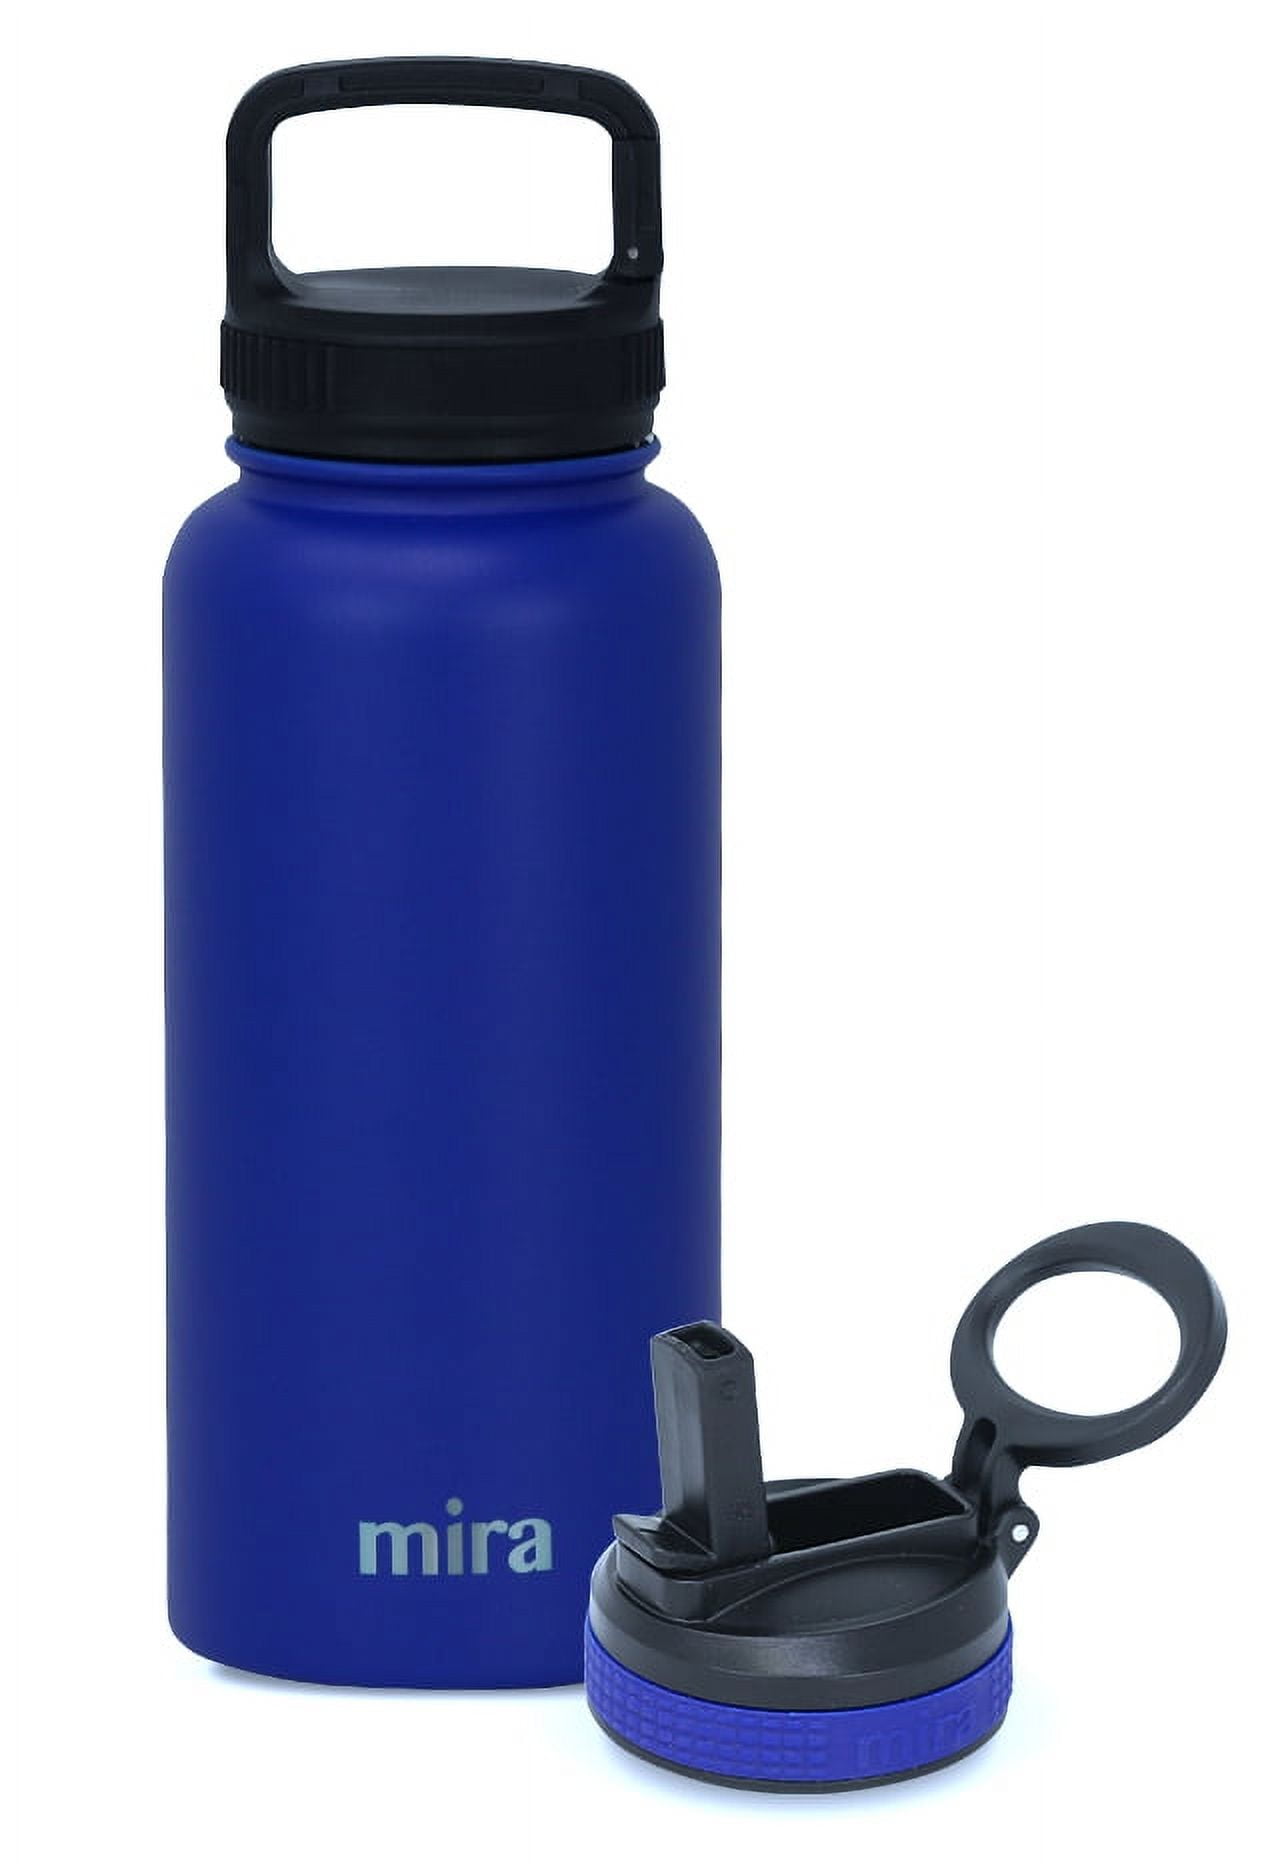 Memoi - Thermal Insulated Stainless Steel Medical 32 oz Water Bottle